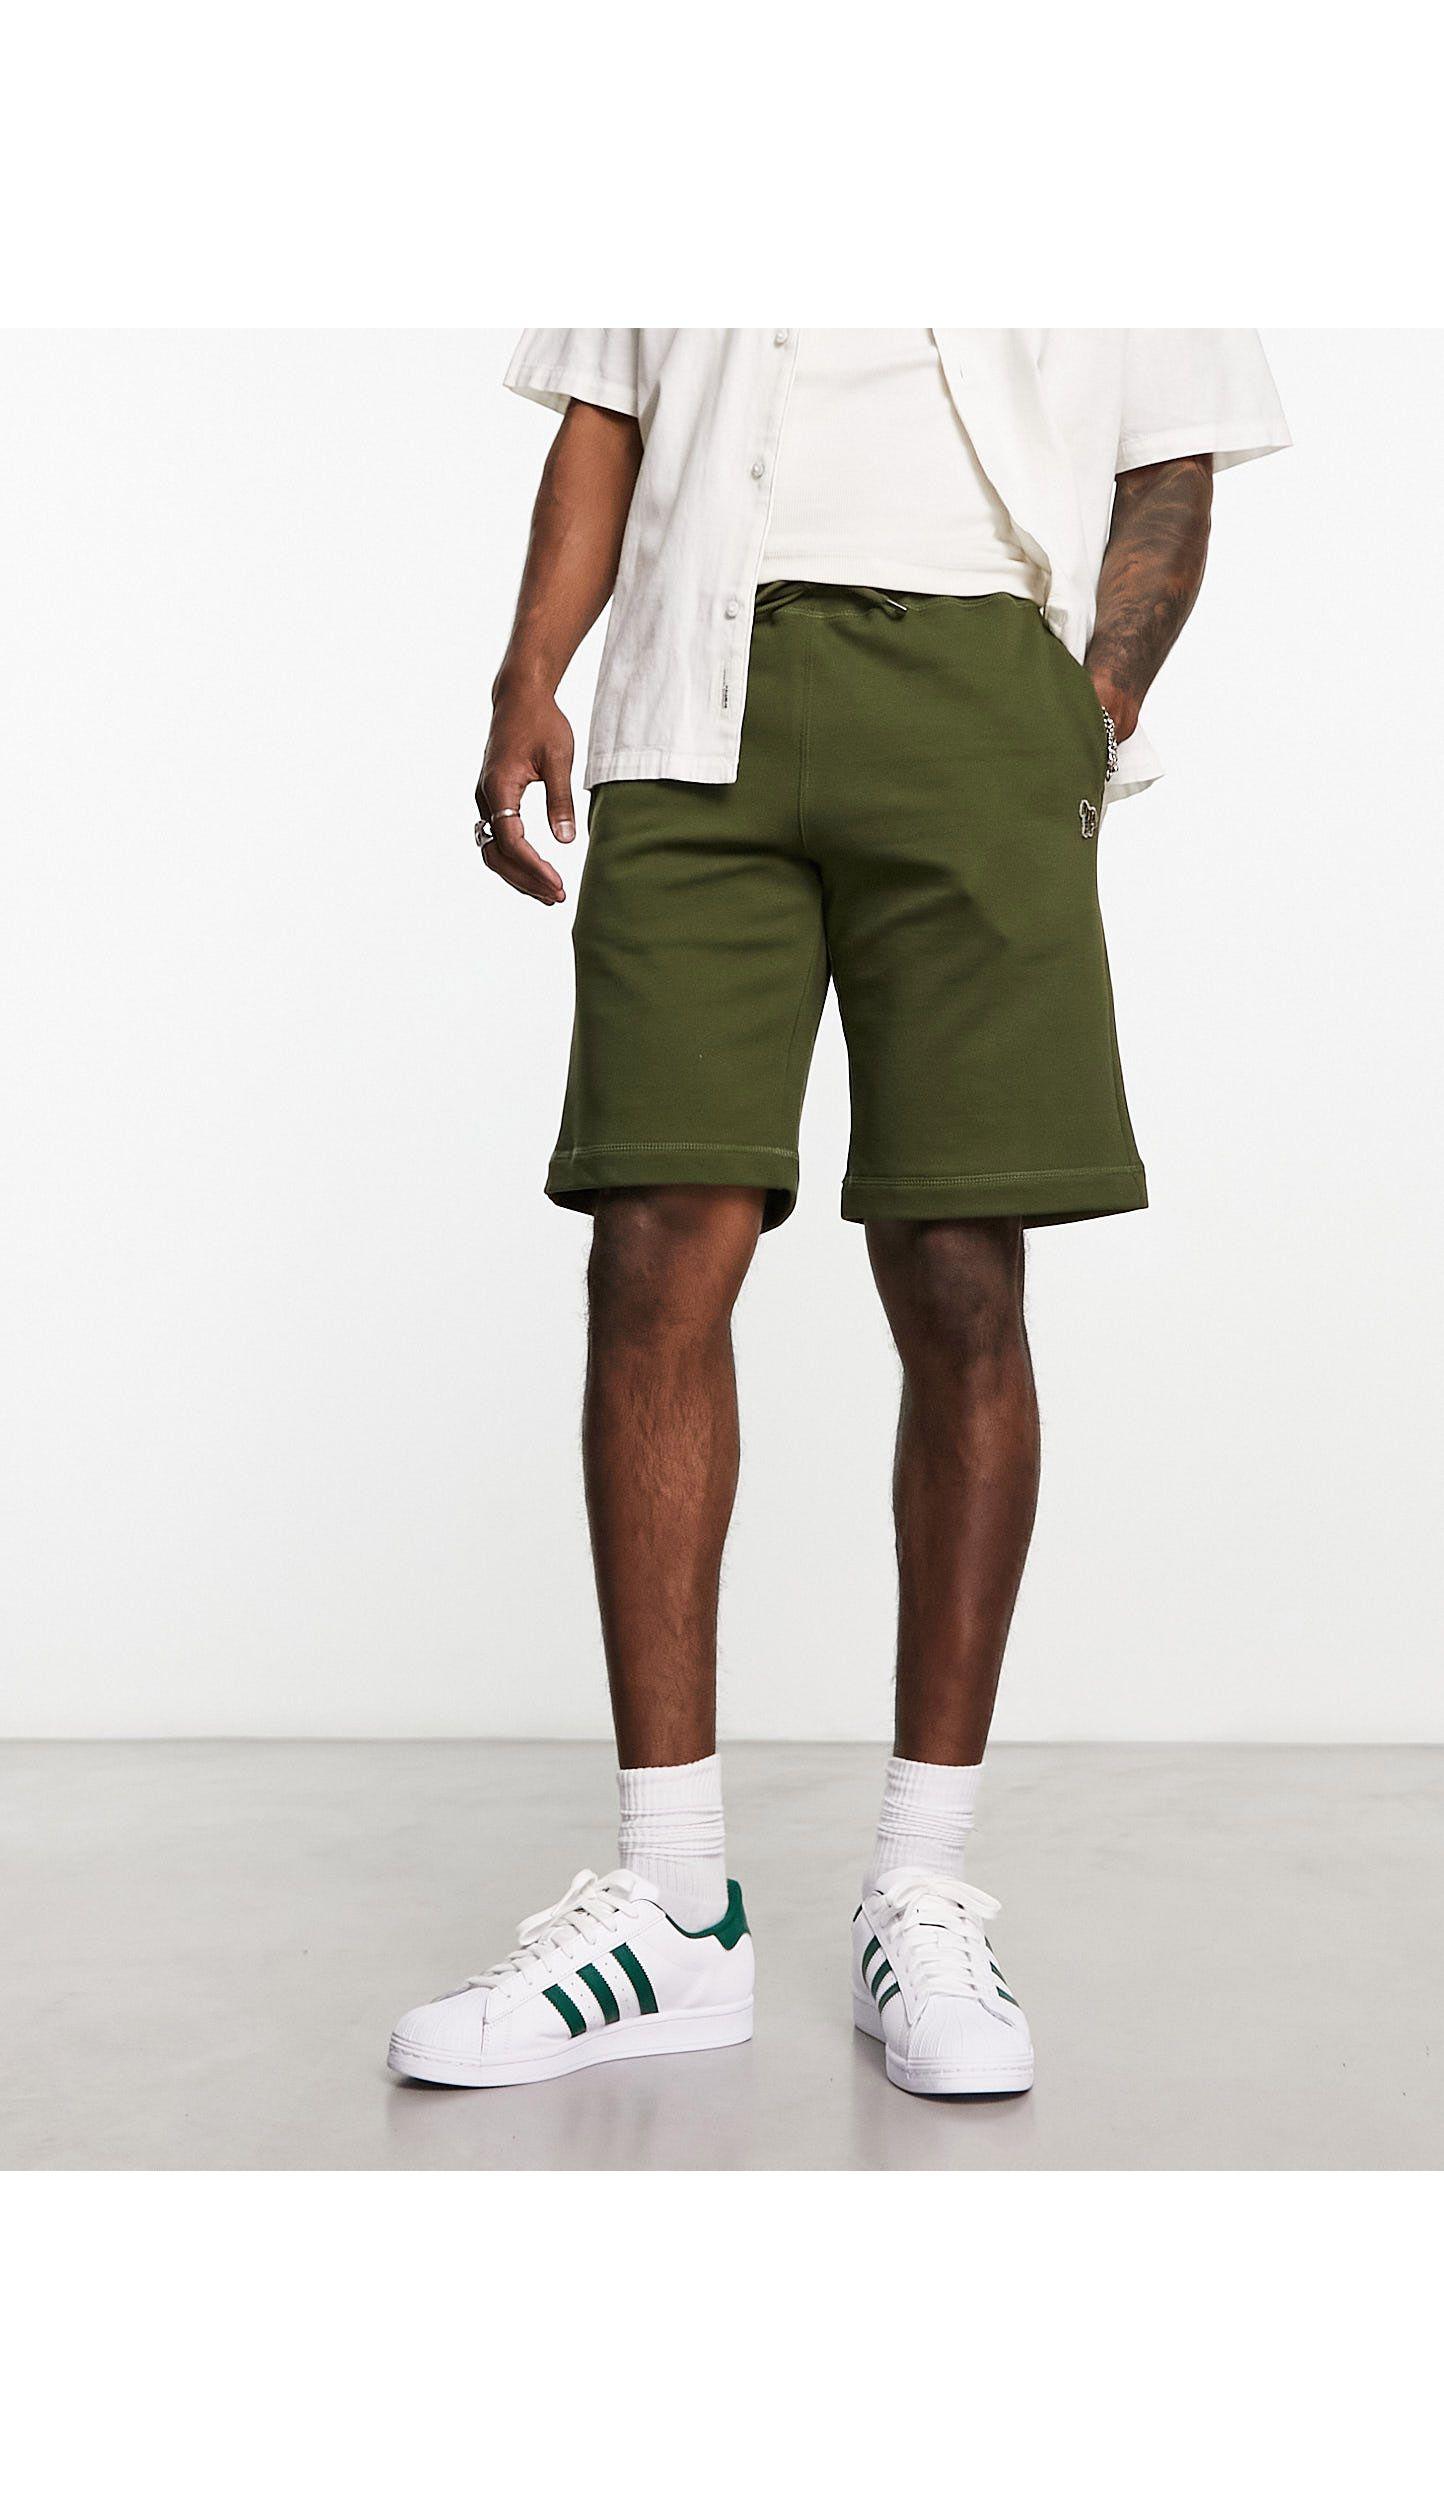 PS by Smith Shorts in Green for Men Lyst